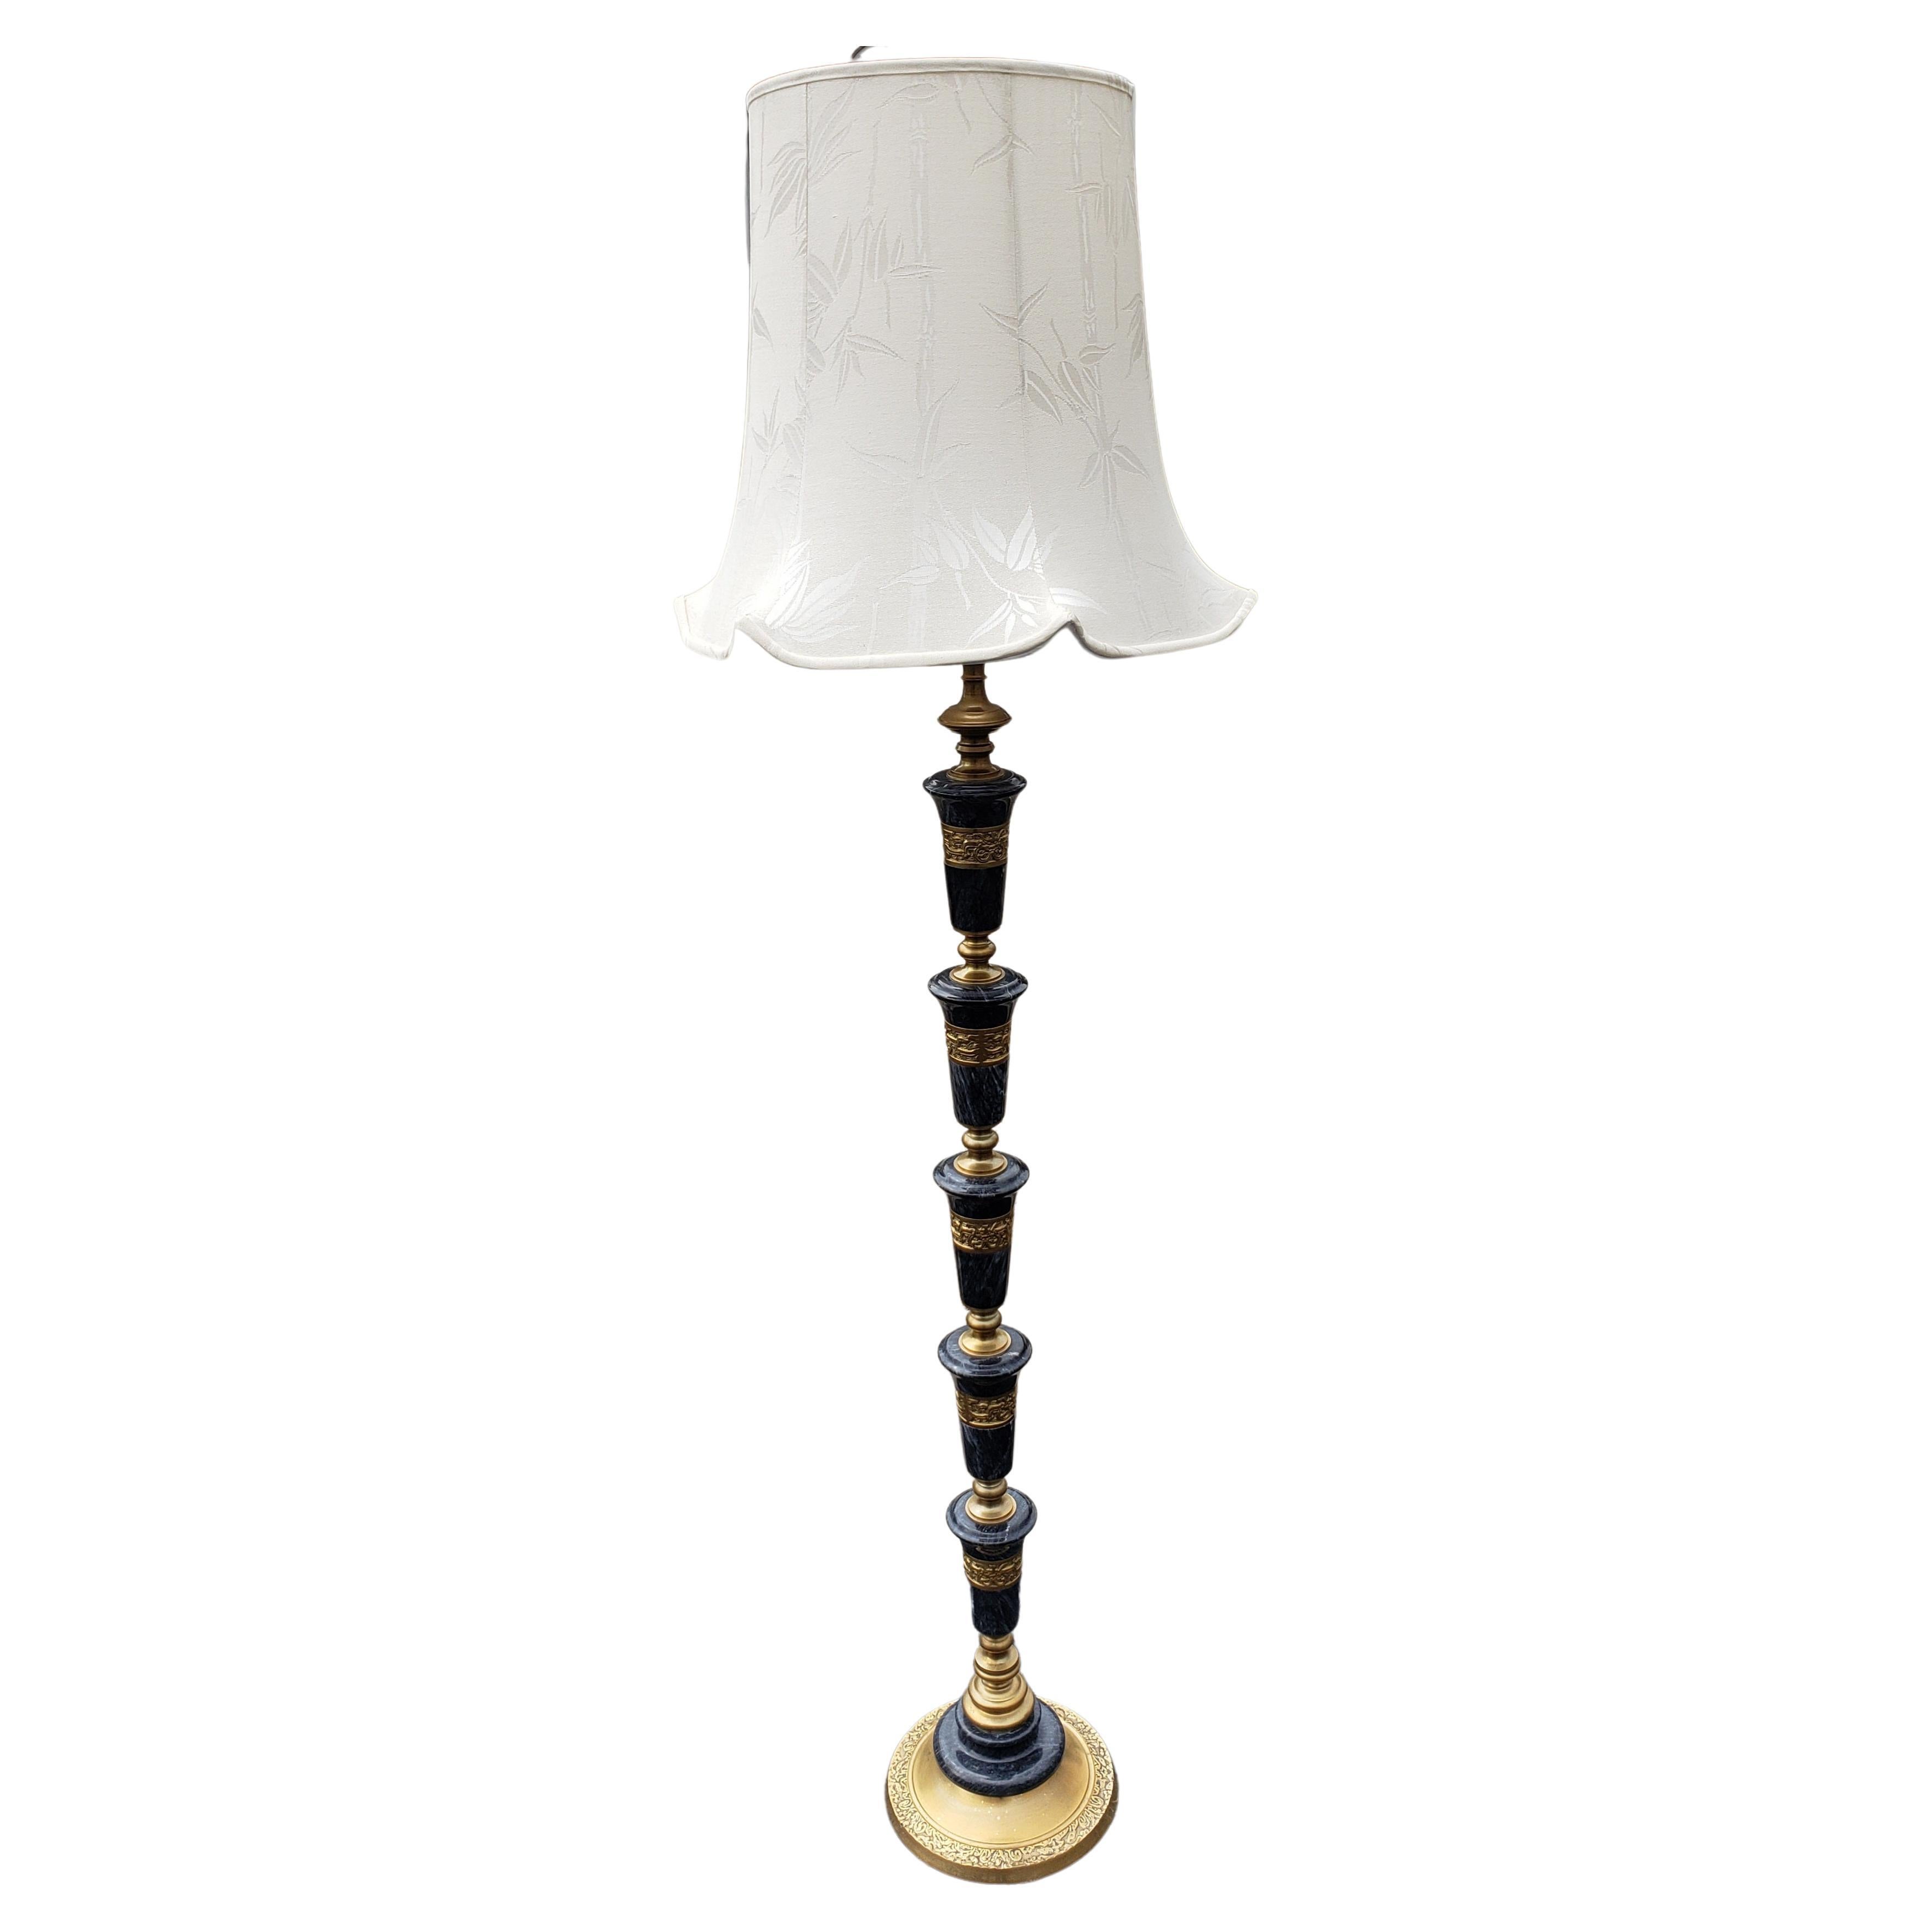 Mid-century Frederick Cooper Asian Regency marble and brass floor lamp. Dark Grey bluish marble with a Asian motif throughout the brass. Original harps that is 9.75in height.
Very heavy lamps, about 21lbs.
Measures: 10